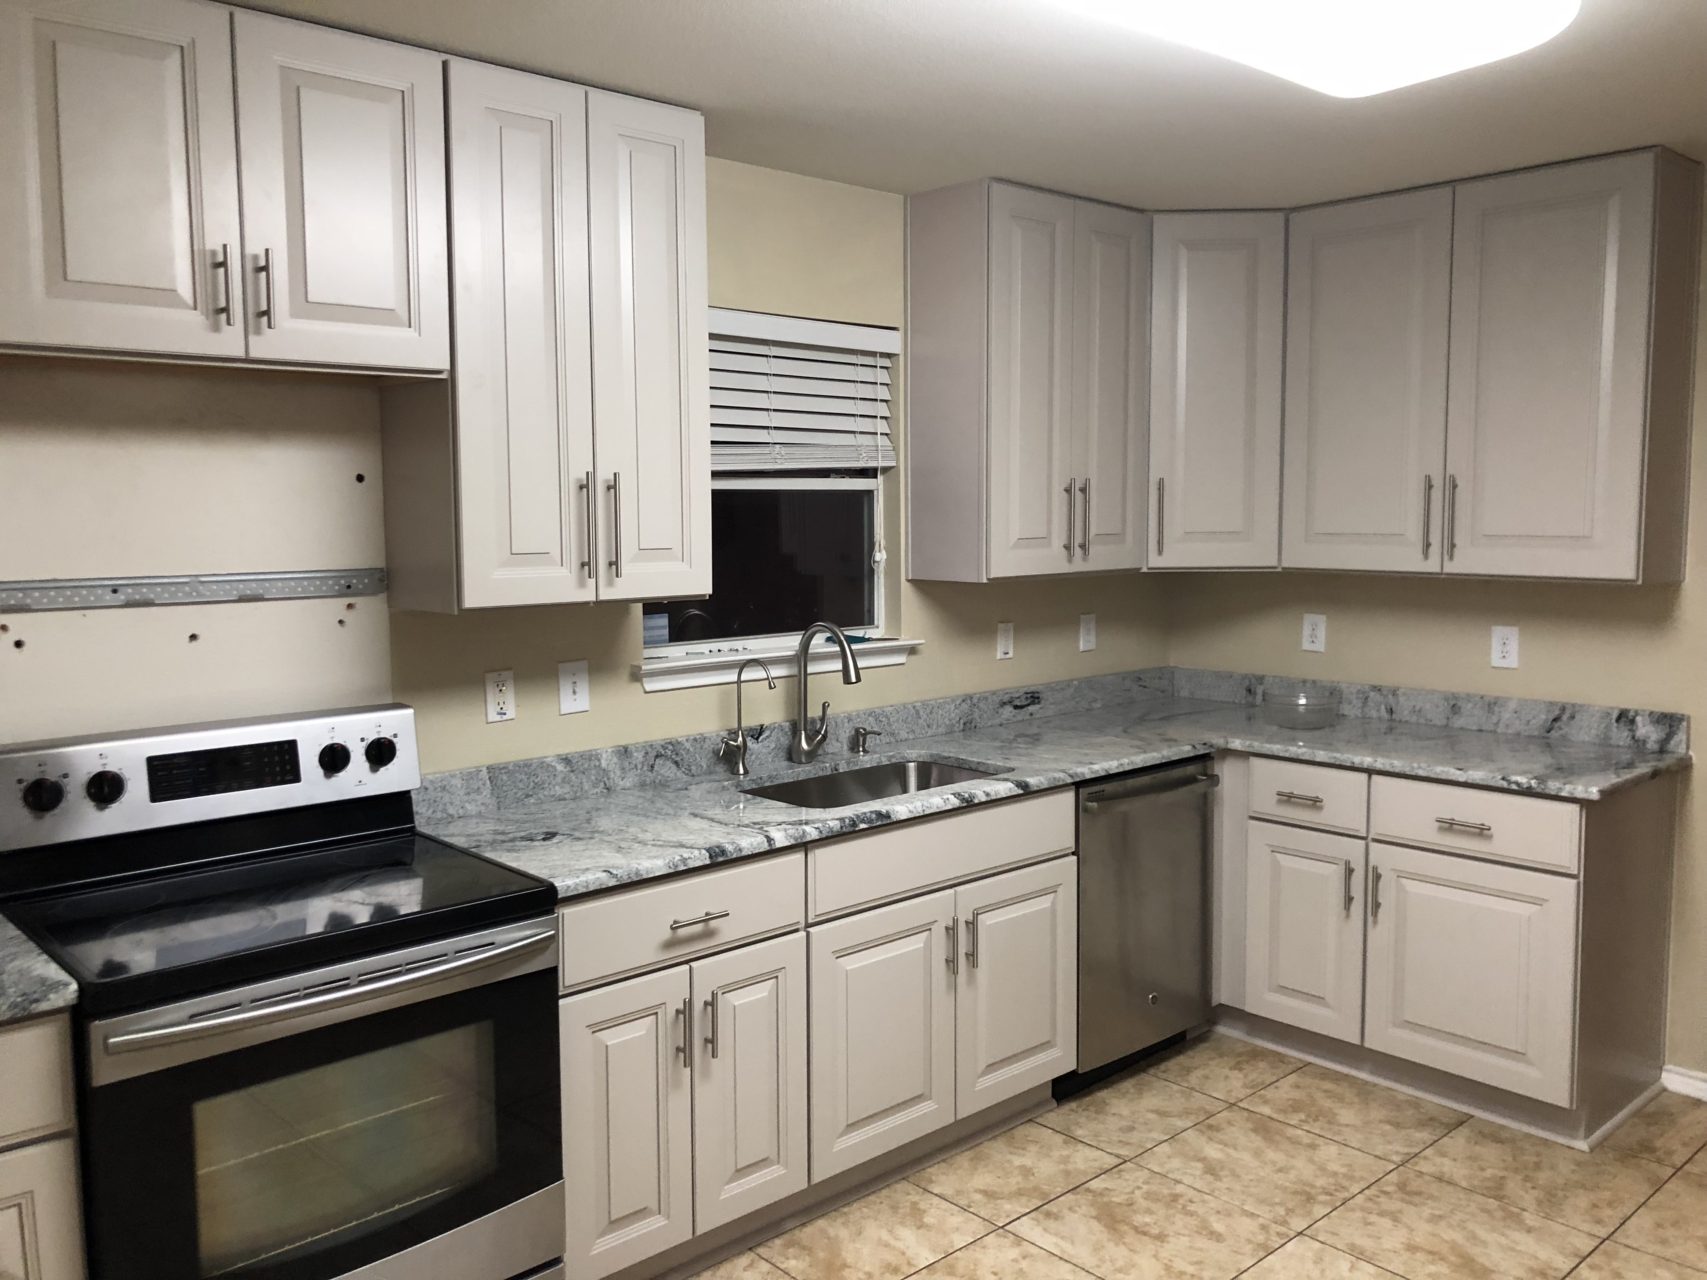 San Antonio Kitchen Remodeling Contractors Kitchen and Bath Boerne Kitchen Cabinets Stone Oak Kitchen Countertops Helotes Remodeling Contractors Alamo Heights affordable